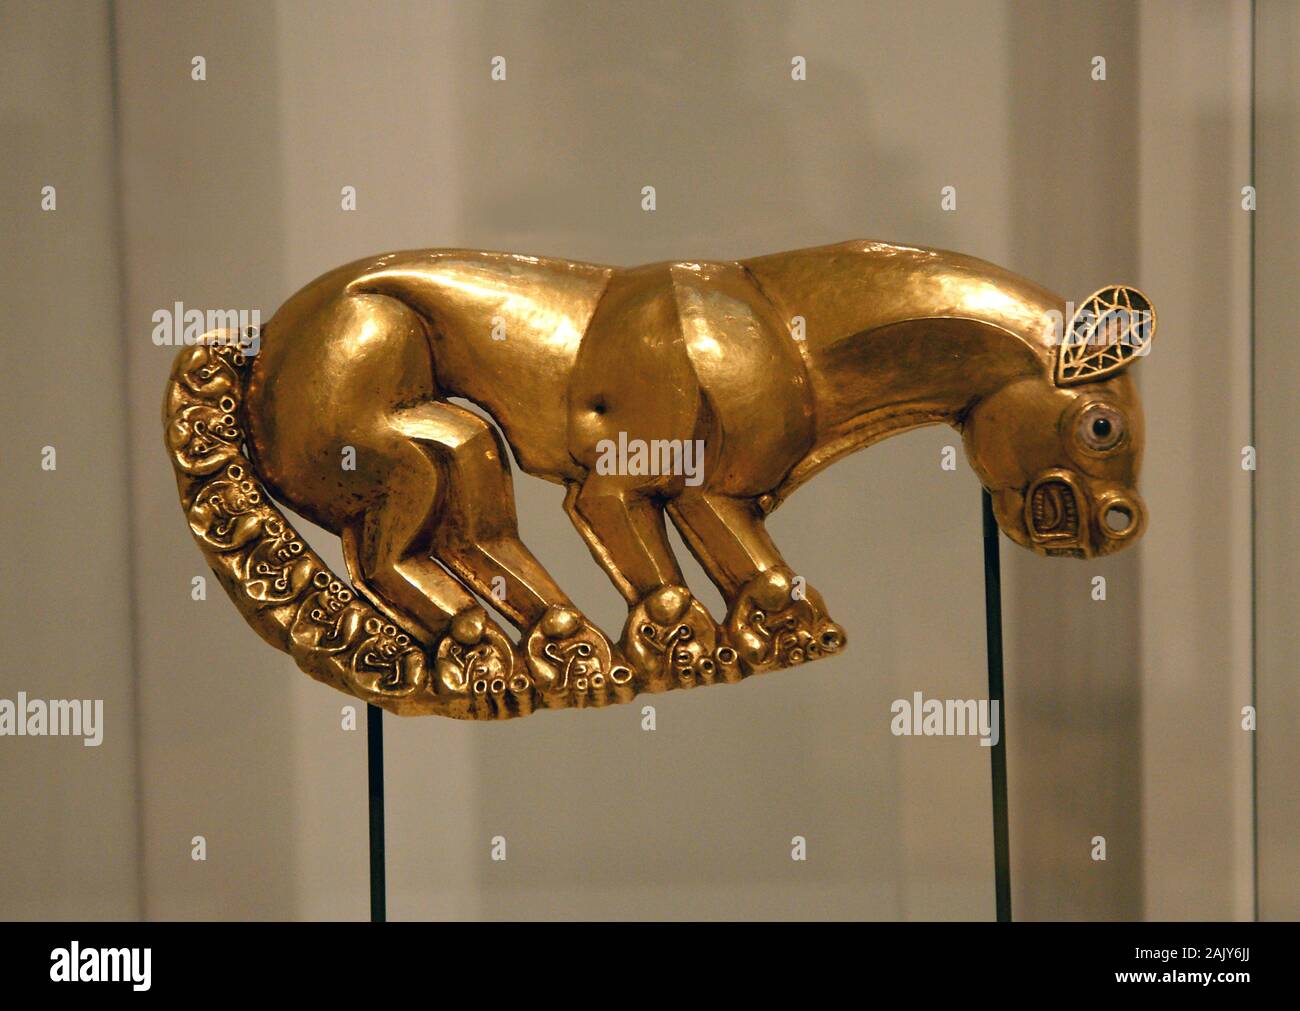 Golden panther. Gold, hematite and opaque glass. Late 7th century BC. Kelermes, Krasnodar, Kuban bassin, Russia. Hermitage Museum. Stock Photo